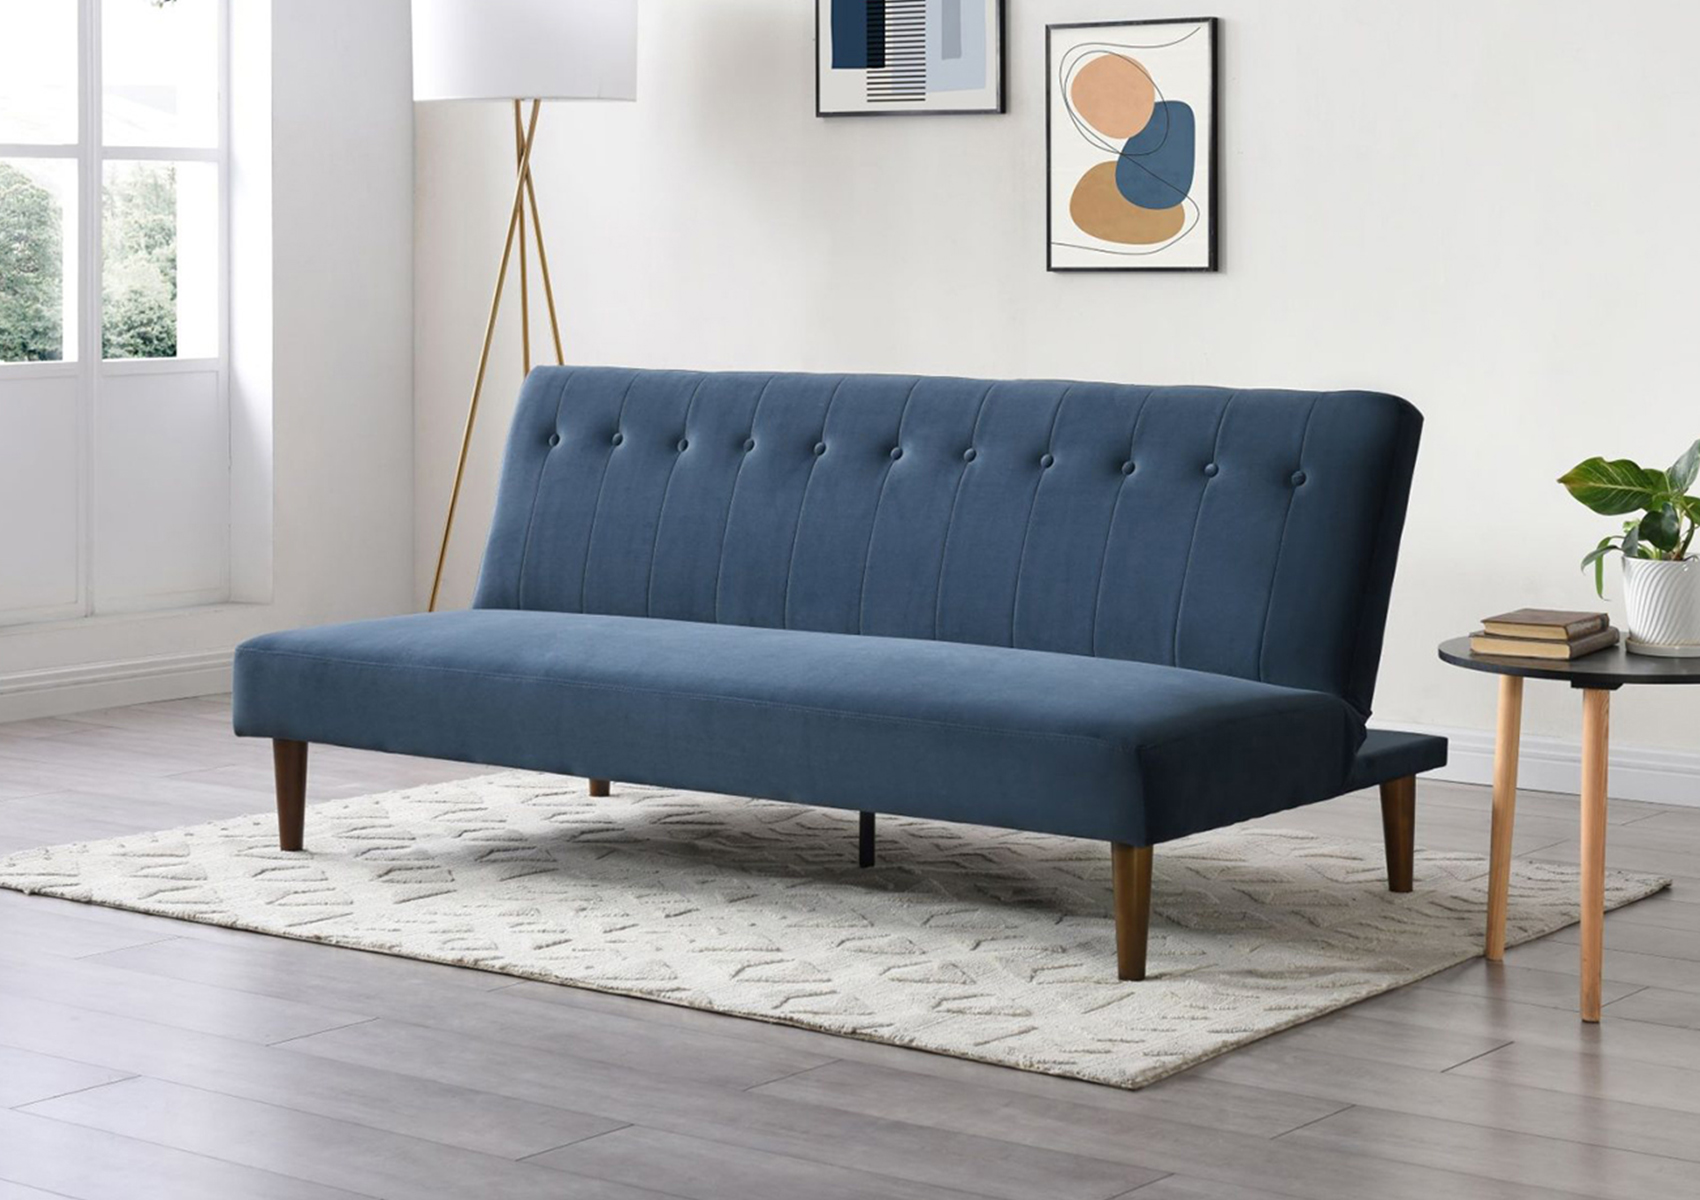 View Cotswold Ink Blue Sofa Bed Time4Sleep information